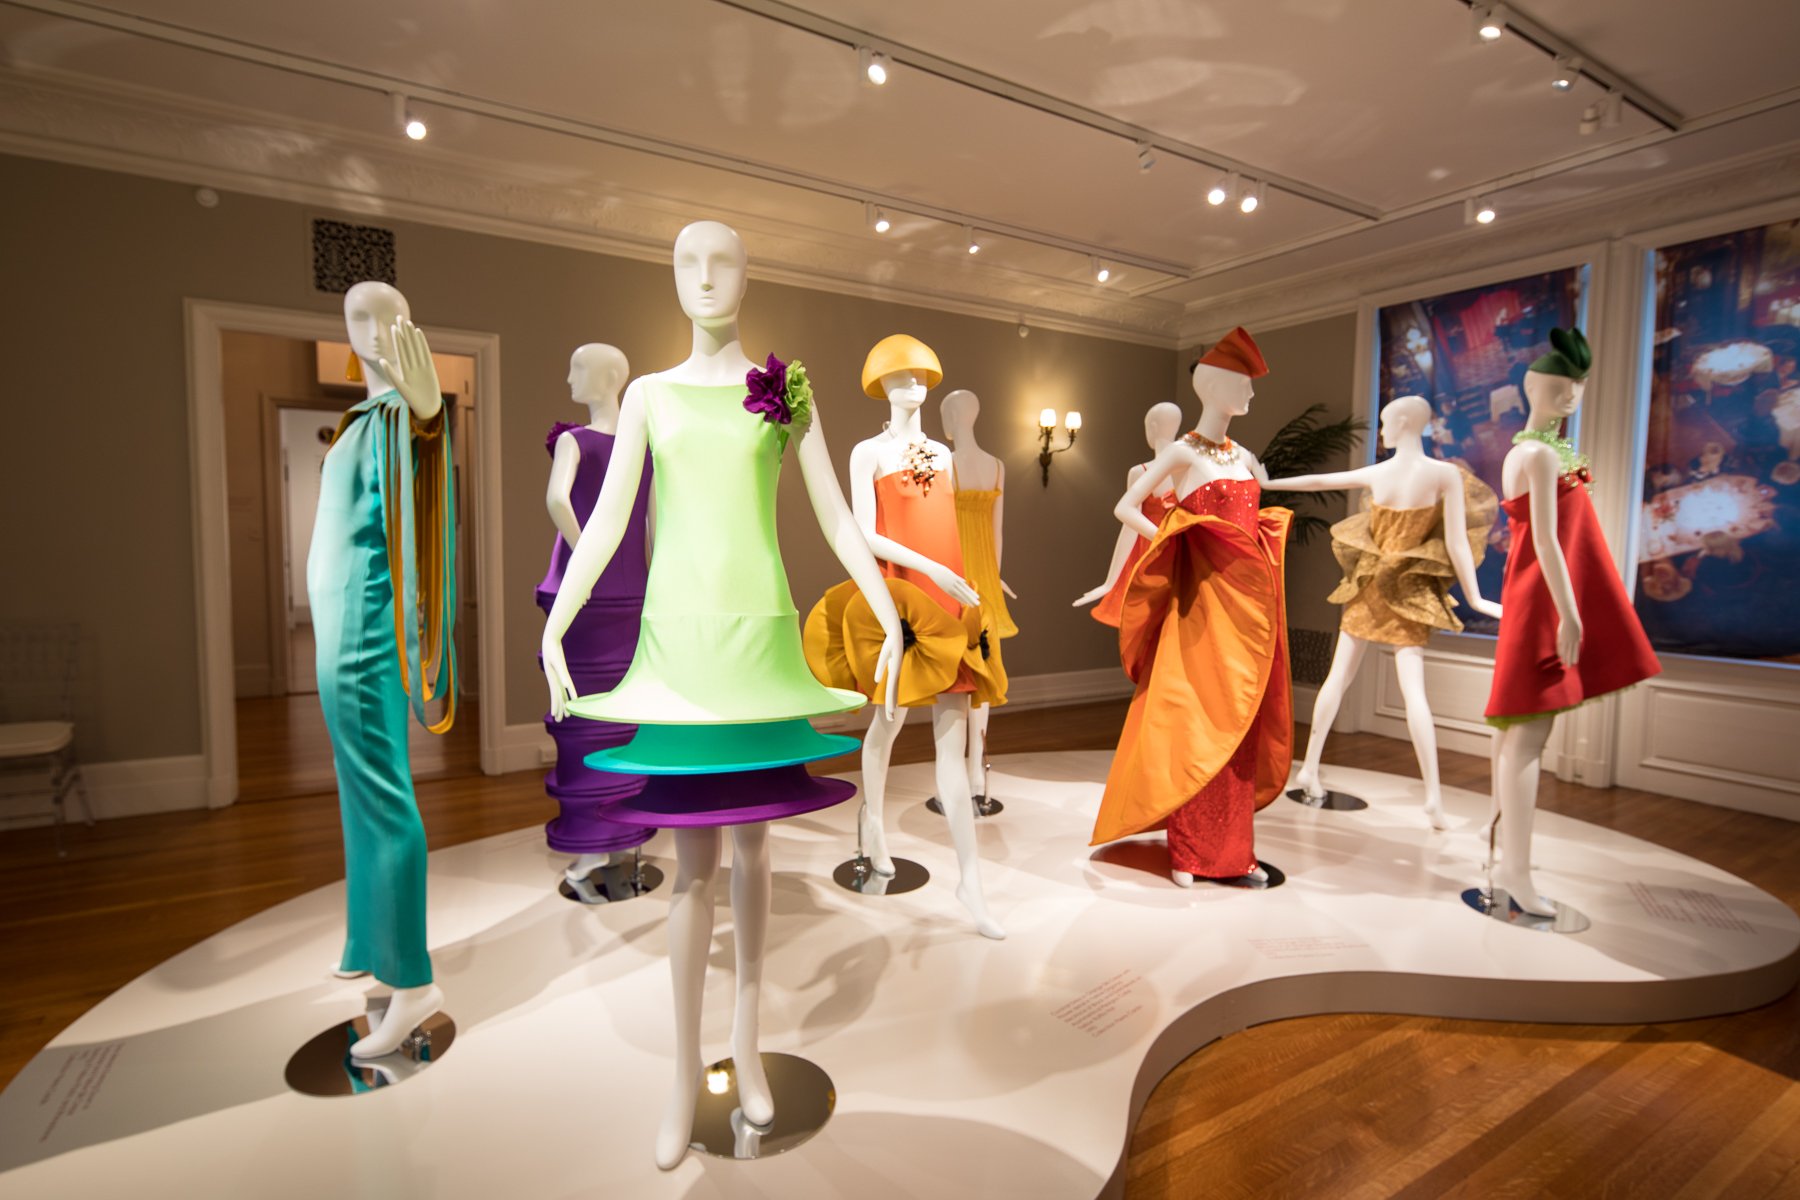 Pierre Cardin Celebrates 70 Years of Fashion with Newport Exhibit